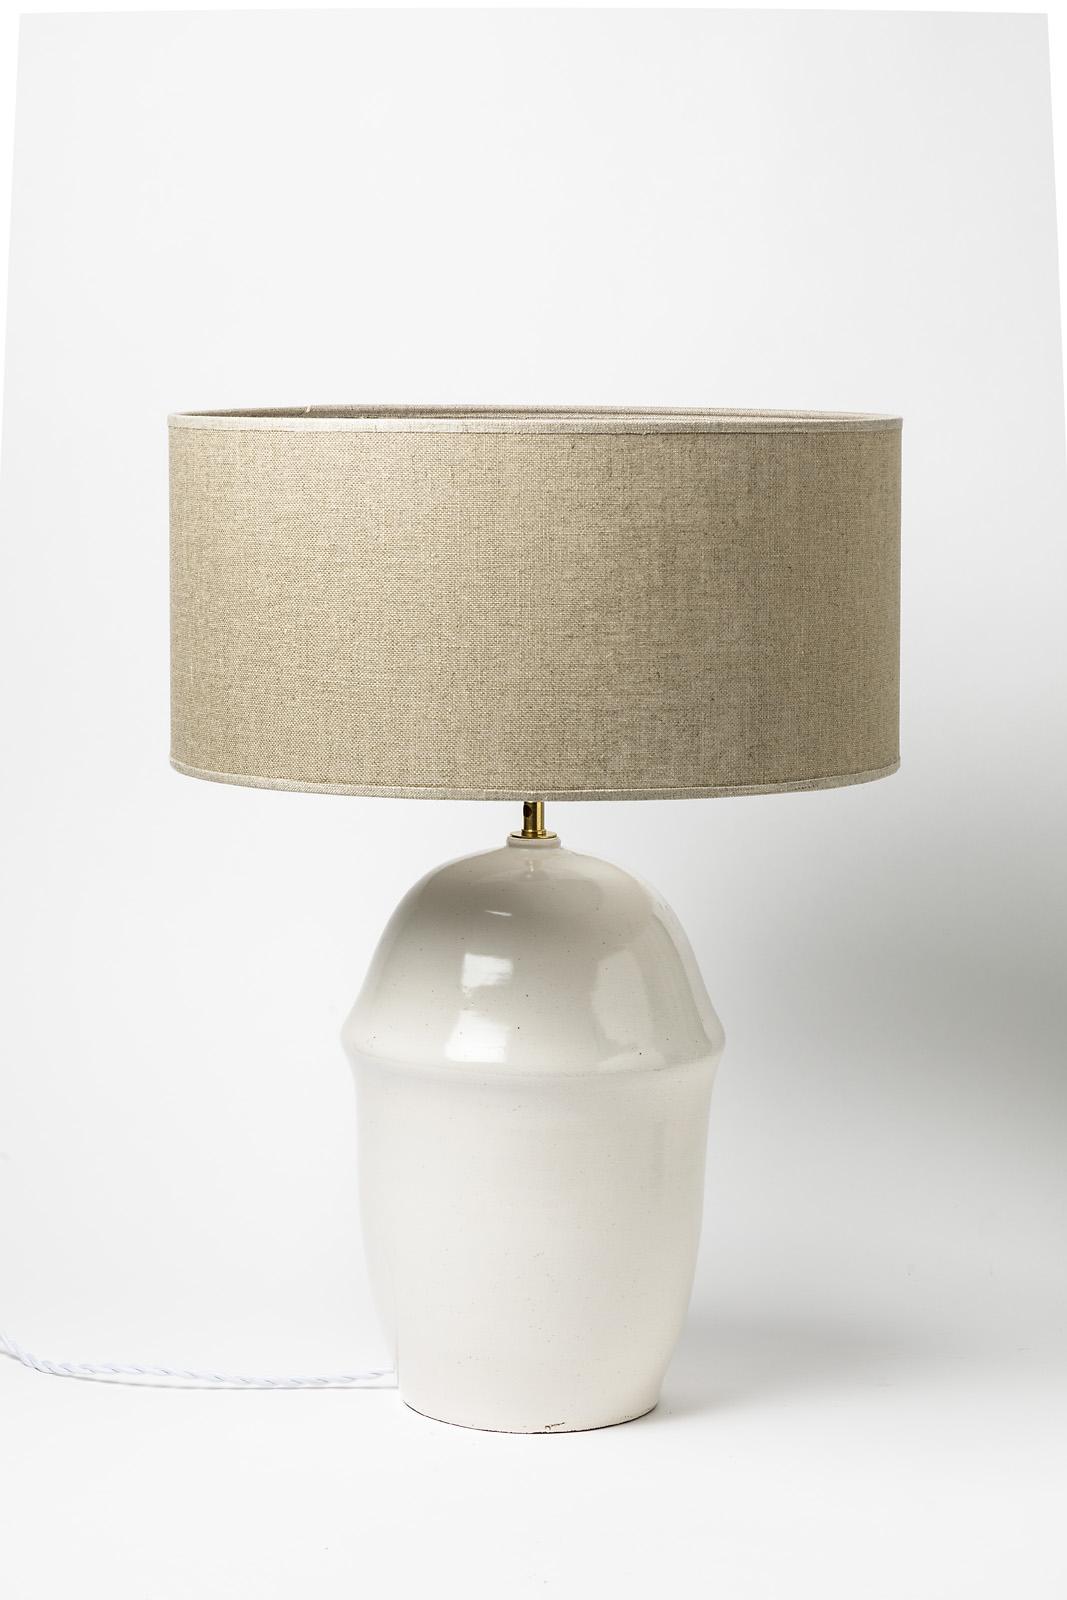 In the style of Jean Besnard

Elegant and decorative Art Deco ceramic table lamp.

Beautiful white ceramic color.

Electric system is new.

Ceramic dimensions: height 34cm large 23cm
with electric system: height 42cm

Sold without